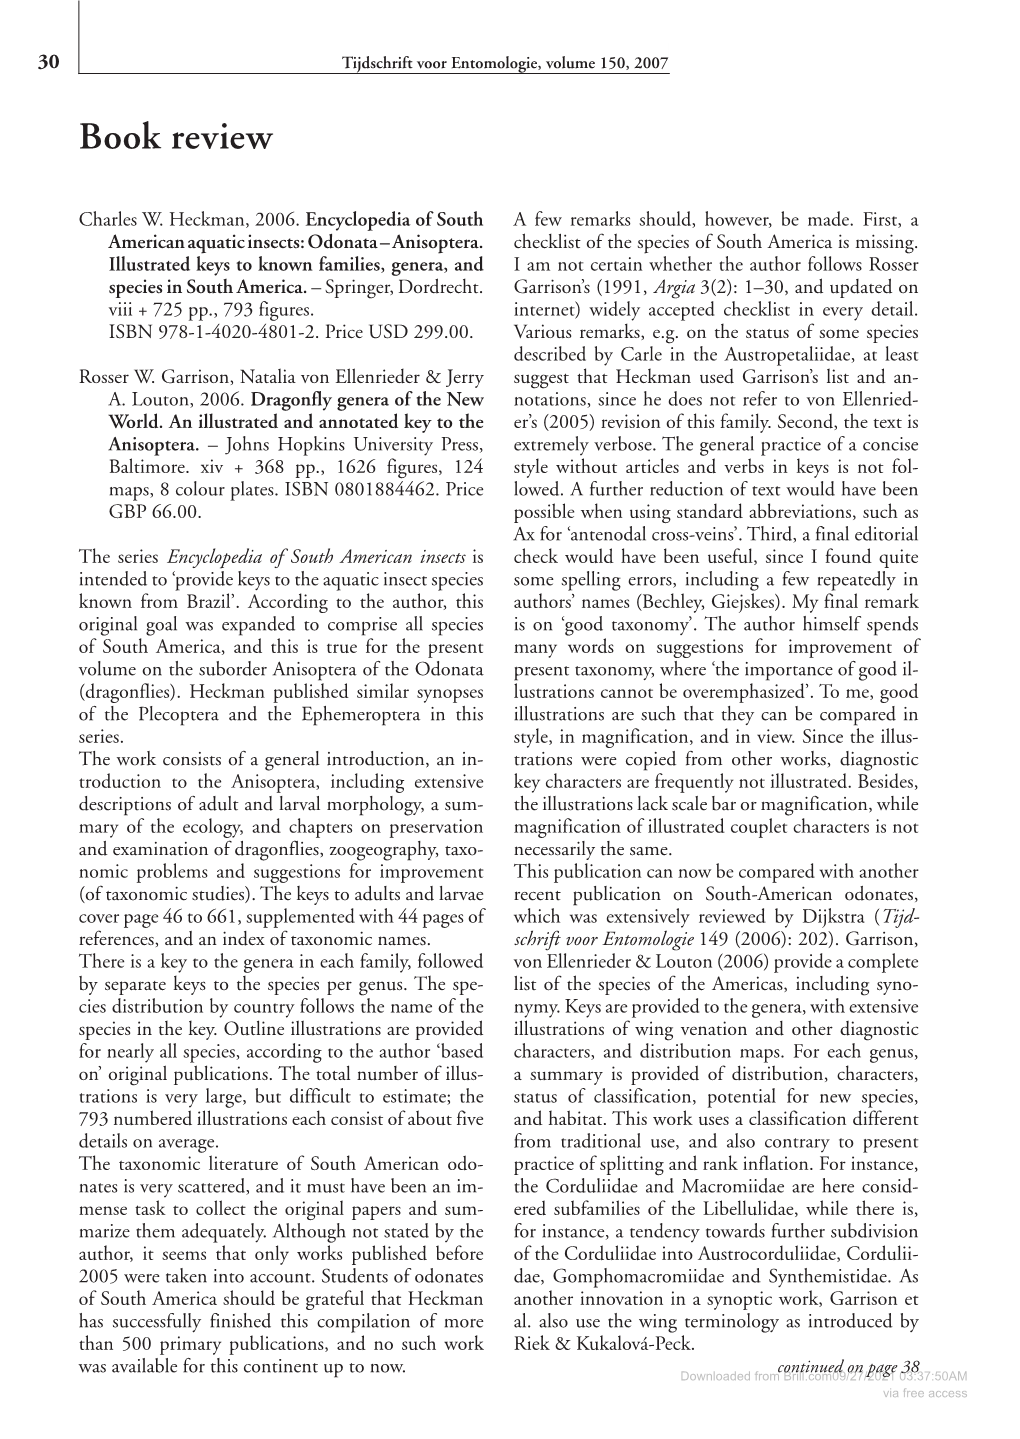 Downloaded Fromcontinued Brill.Com09/27/2021 on Page 03:37:50AM38 Via Free Access 38 Tijdschrift Voor Entomologie, Volume 150, 2007